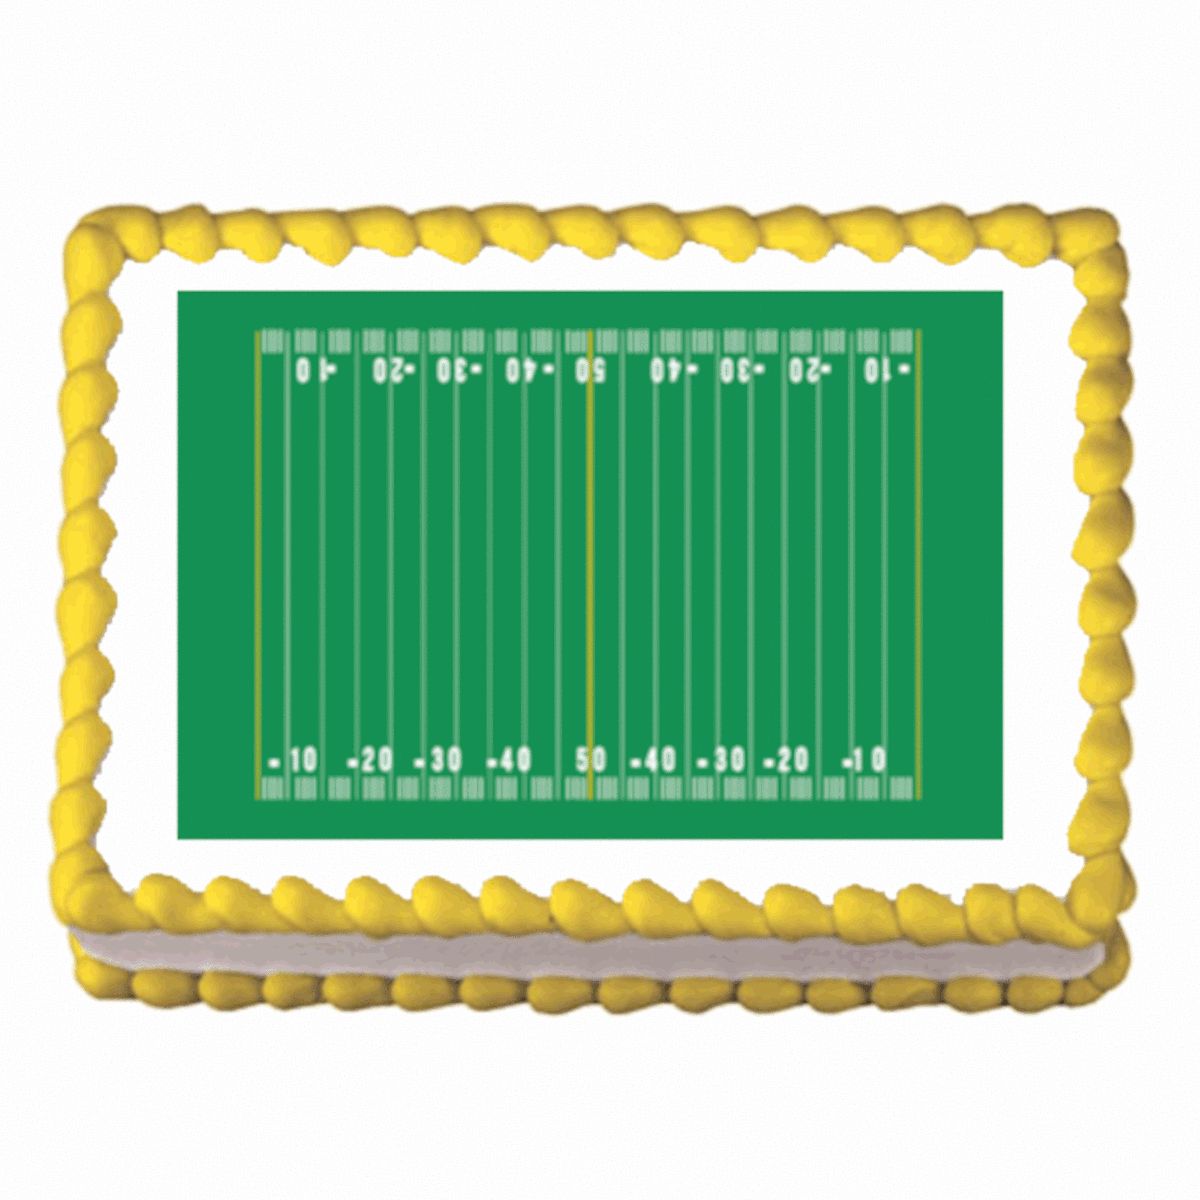 NFL Football Field Edible Cake Topper Decoration Image